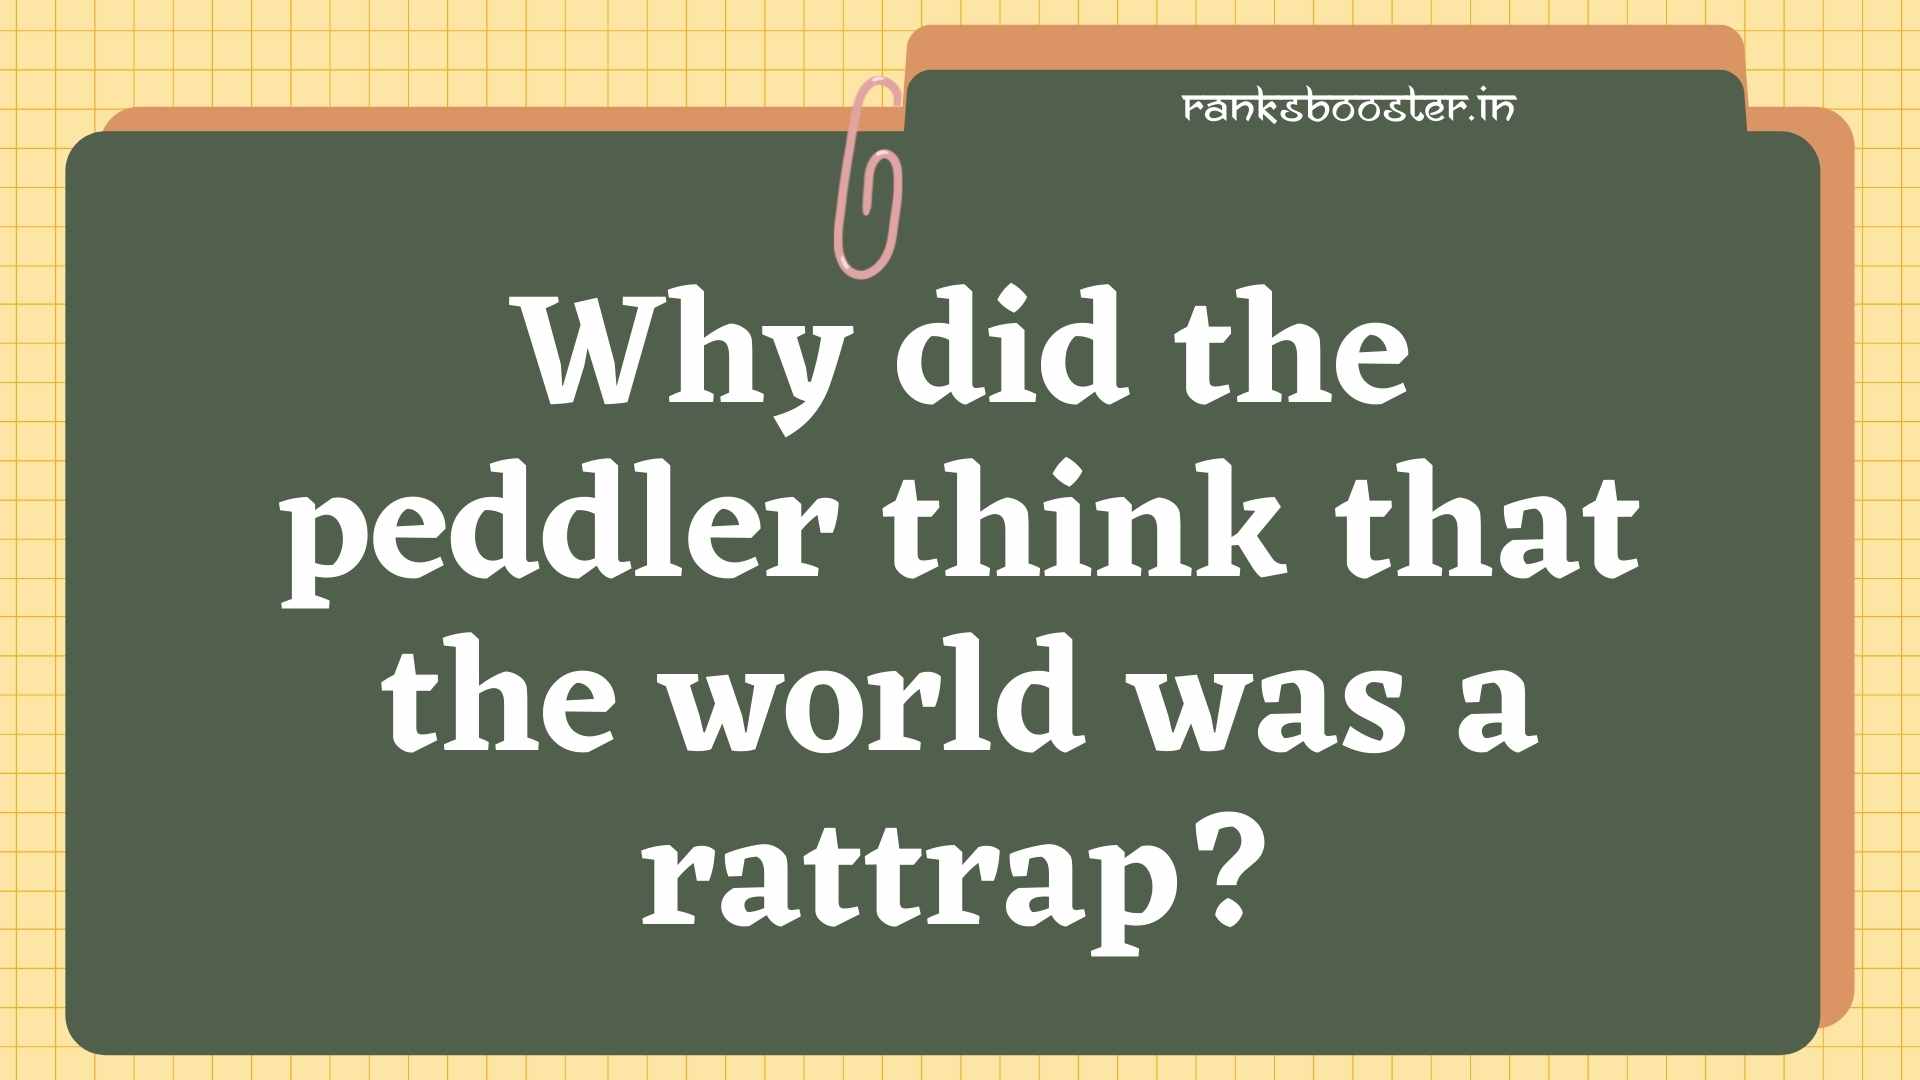 Why did the peddler think that the world was a rattrap? [CBSE (AI) 2009]